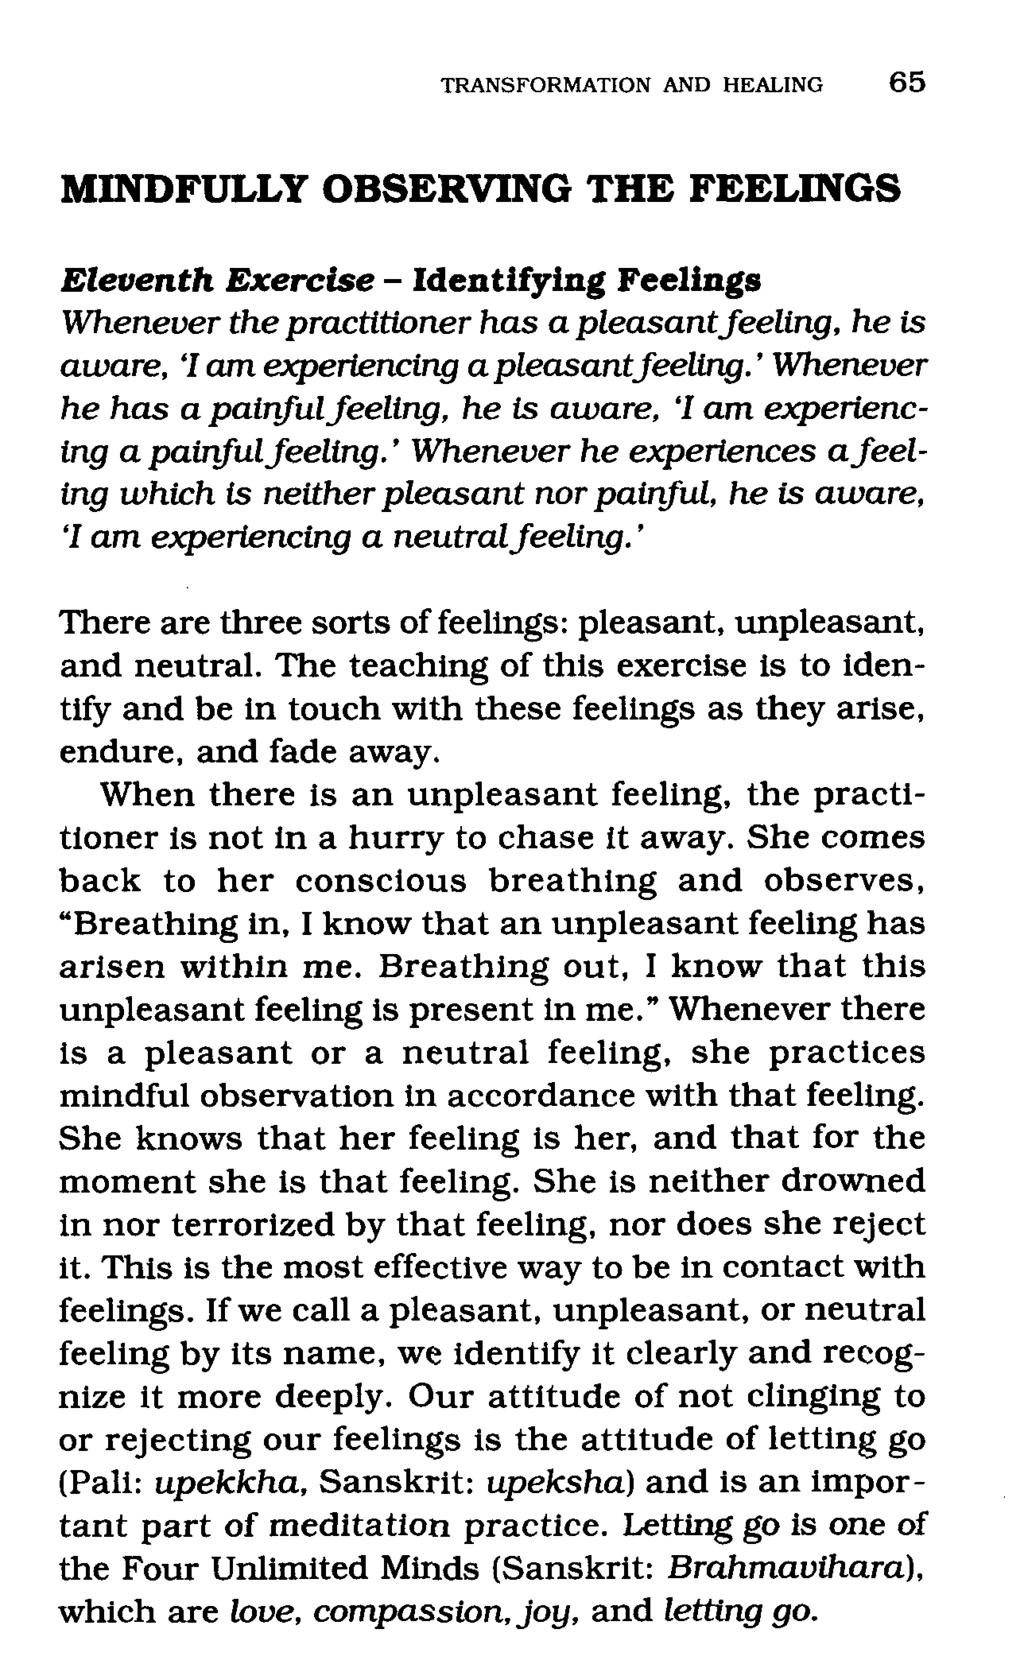 MINDFULLY OBSERVING THE FEELINGS Eleventh Exercise - Identifying Feelings Whenever the practitioner has a pleasant feeling, he is aware, '1 am experiencing apleasant feeling.